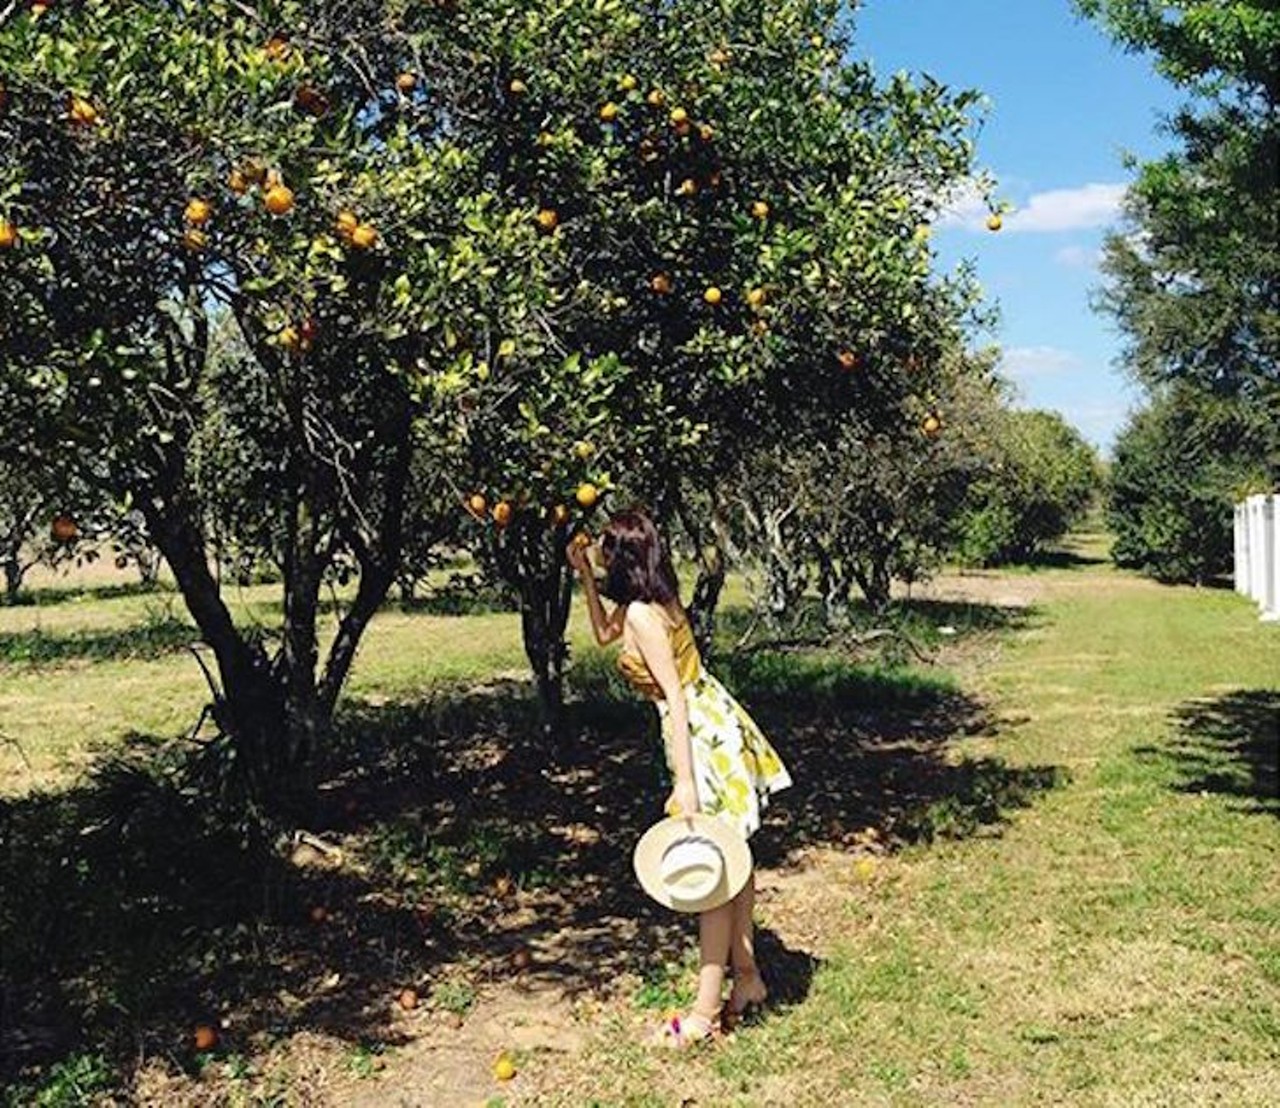 Showcase of Citrus
5010 US-27, Clermont | 352-394-4377
Just 15 minutes from Disney, this locale has over 50 varieties of citrus, but during this time of year you can find Valencia oranges, red and white grapefruit, Honey Tangerine and lemons.
Photo via rwyiy/Instagram